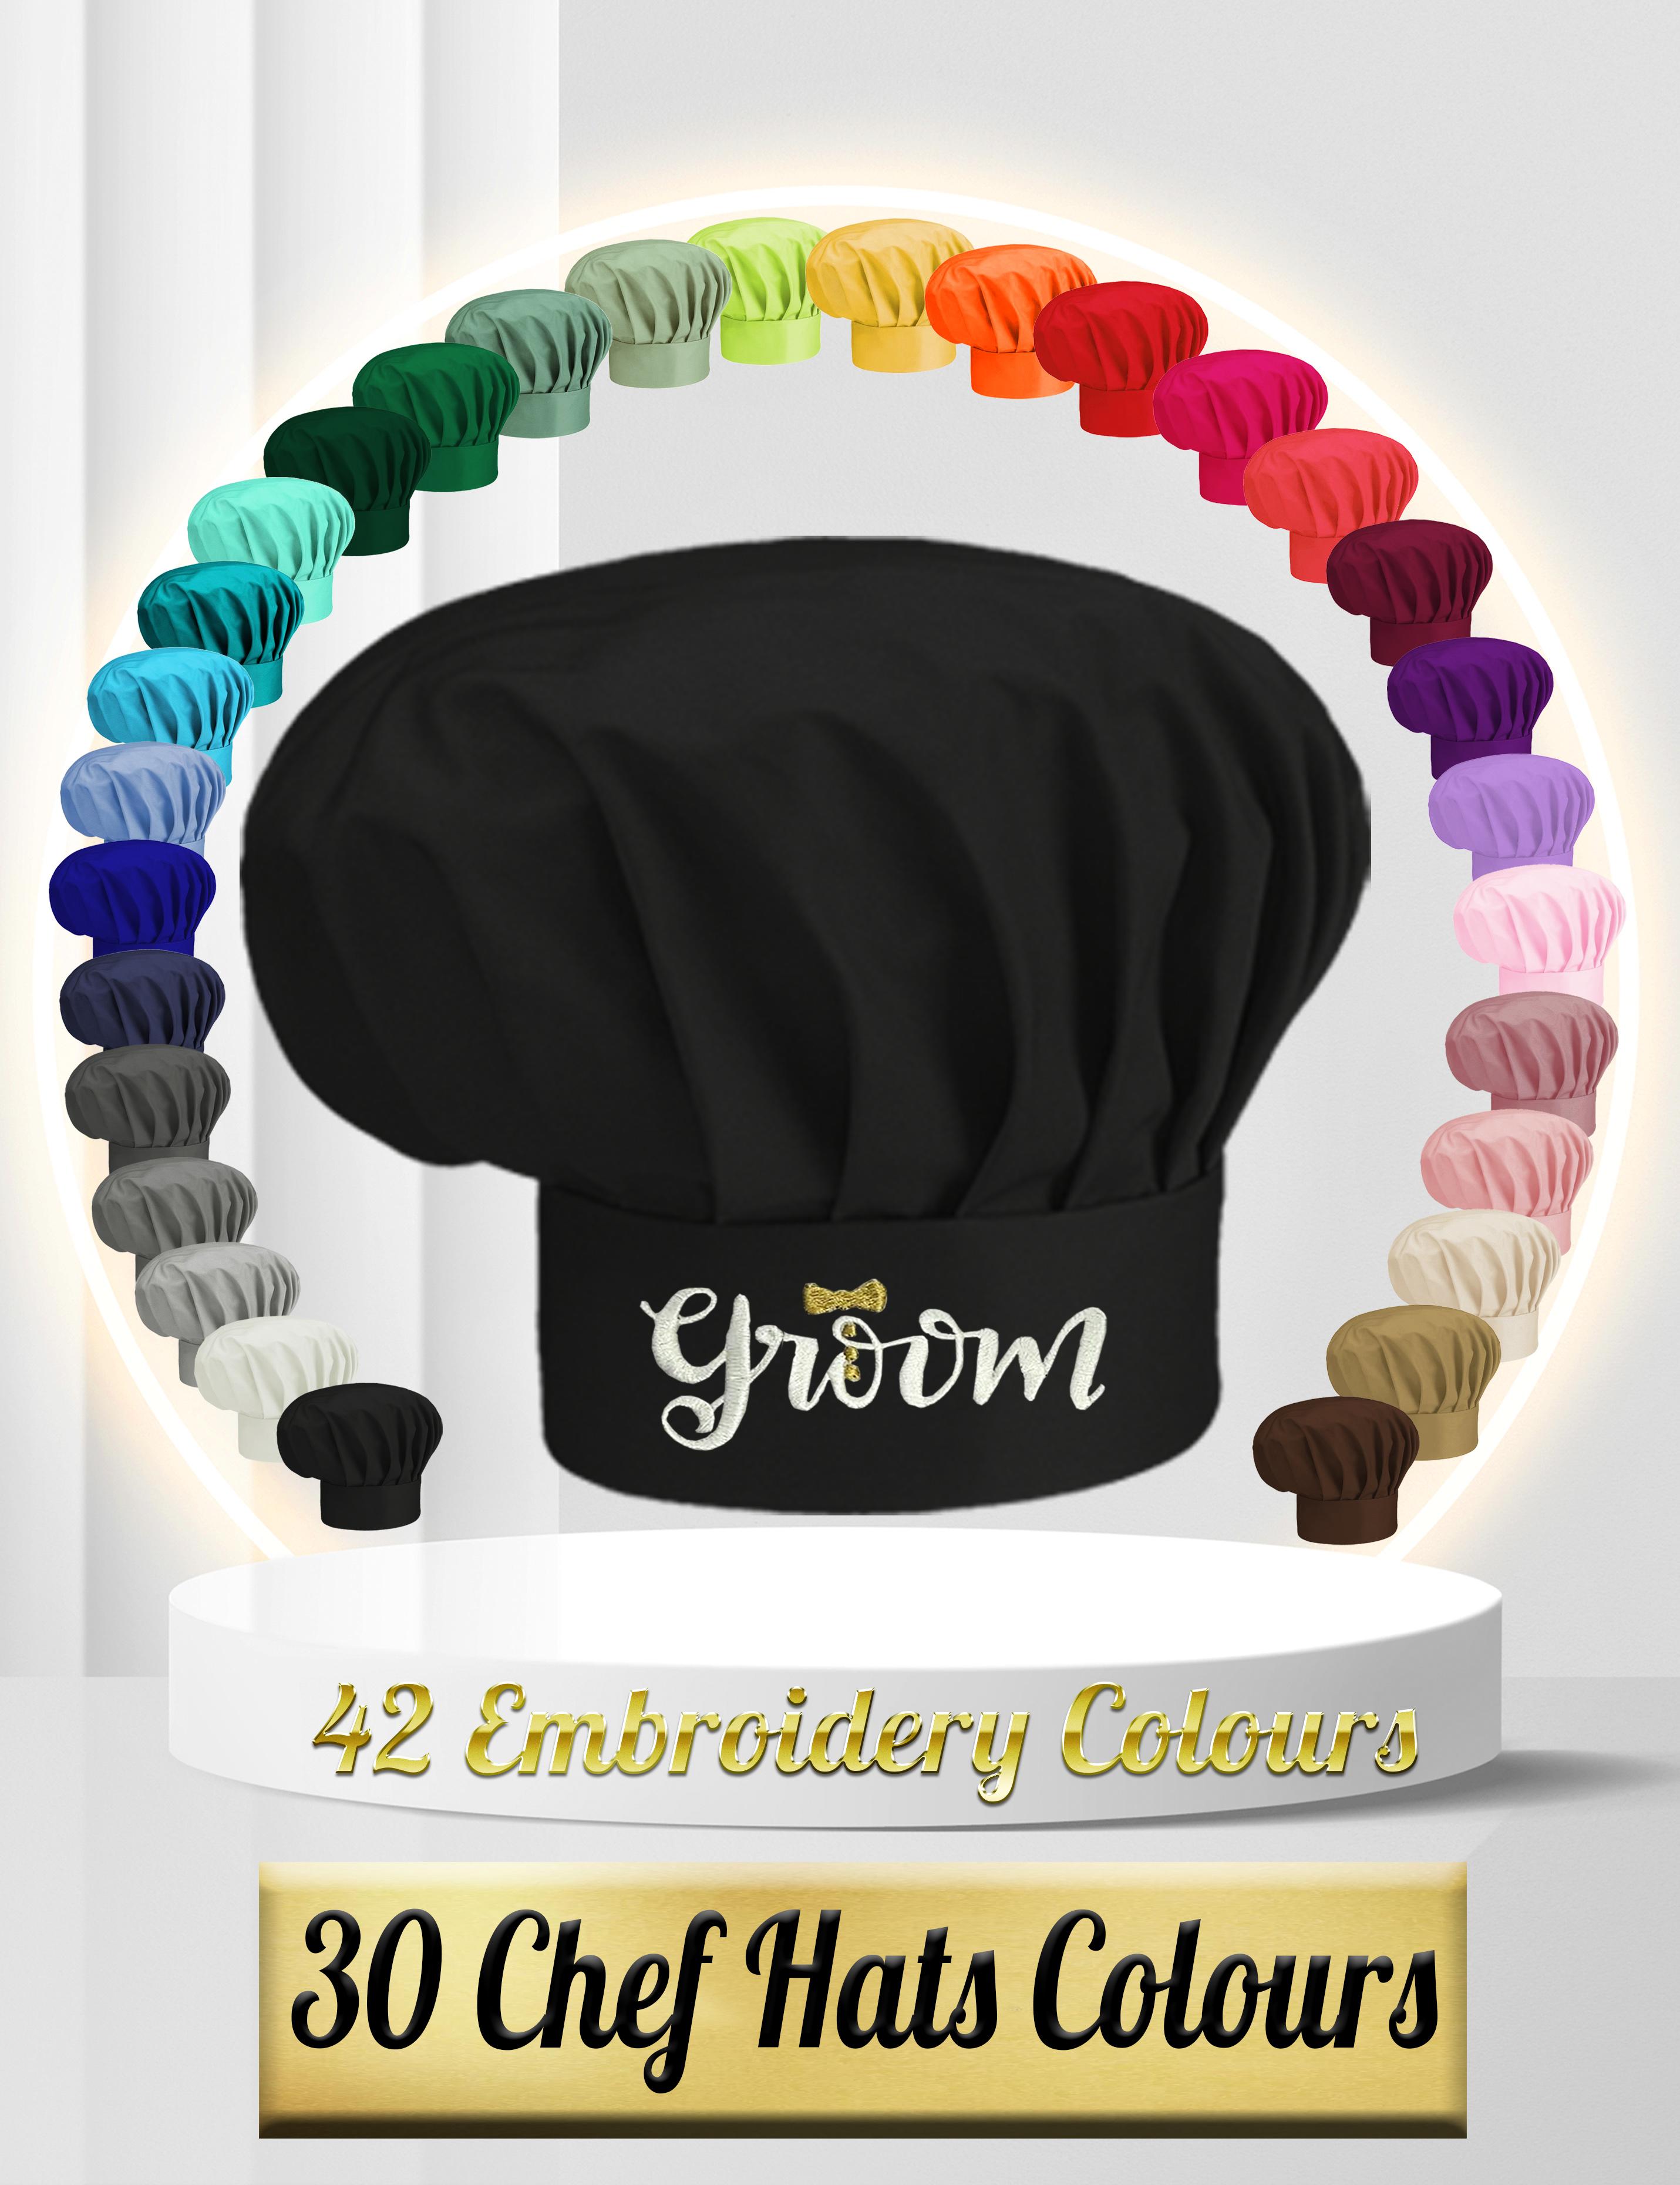 Embroidered Groom Chef's hat